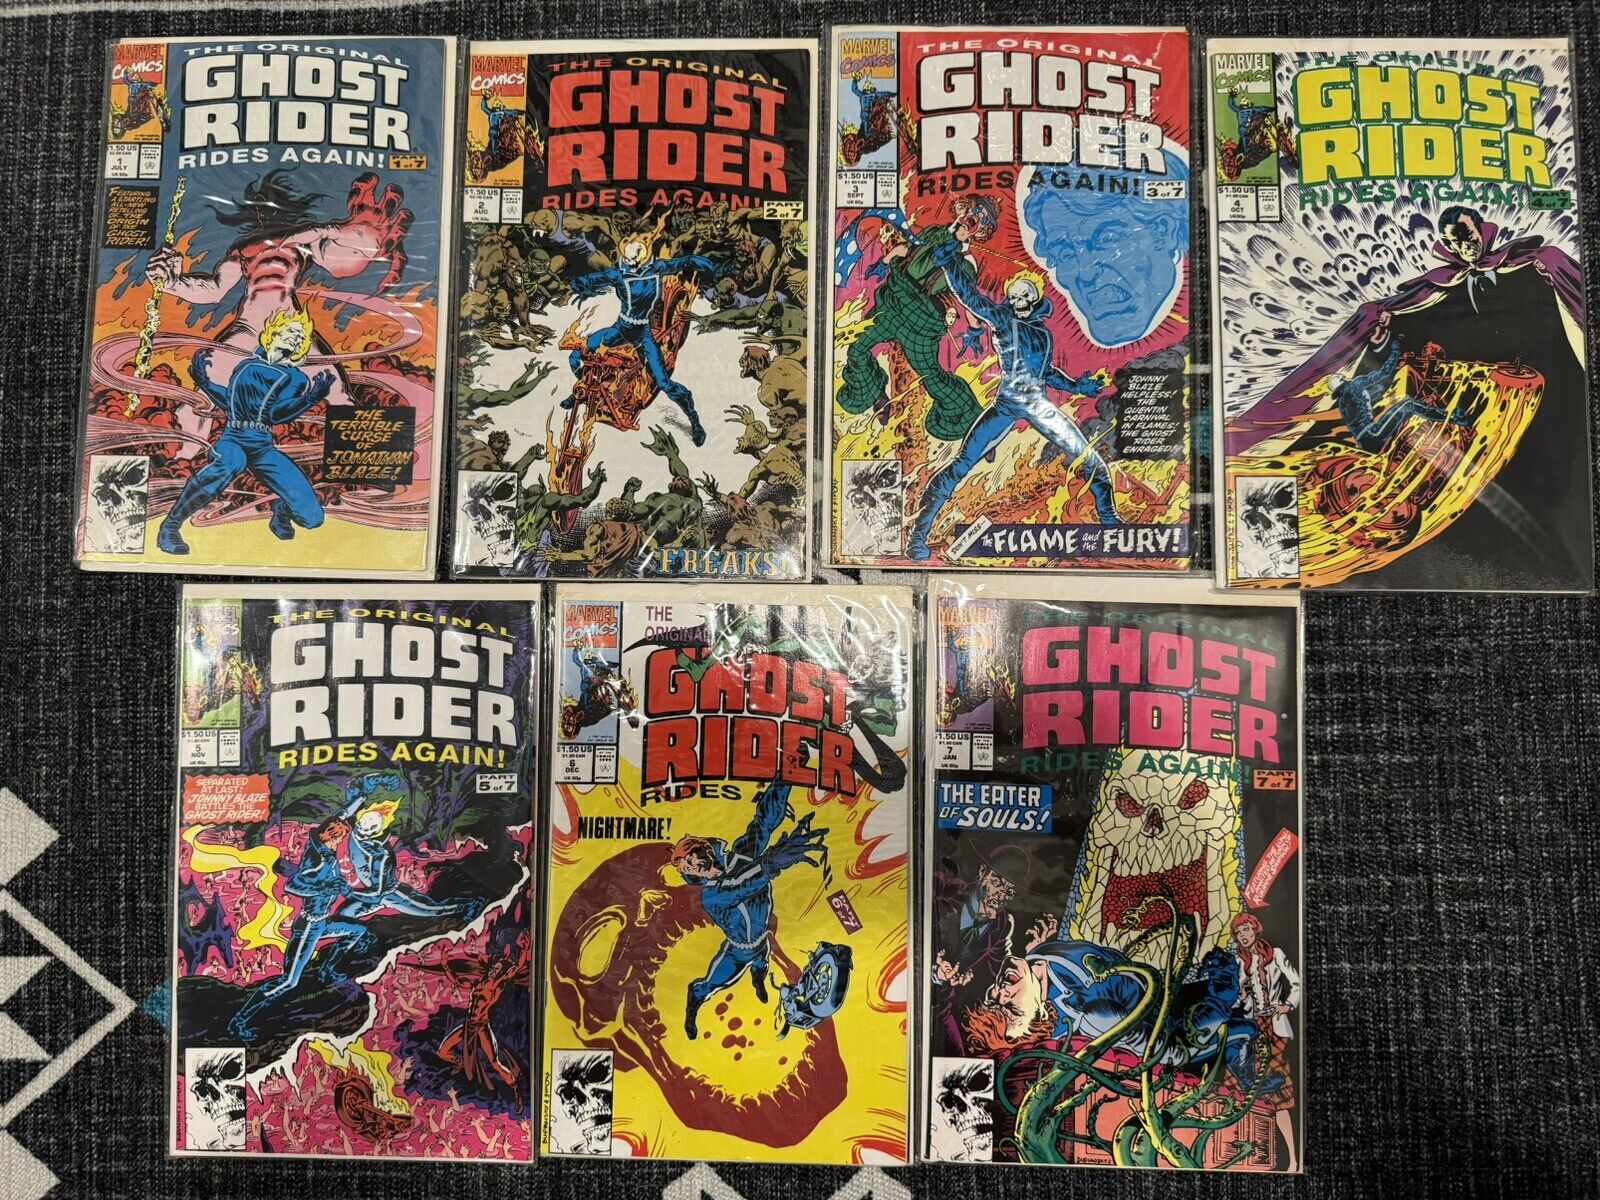 The Original Ghost Rider Rides Again #1 of 7 Marvel Comic Book 1991 July 1